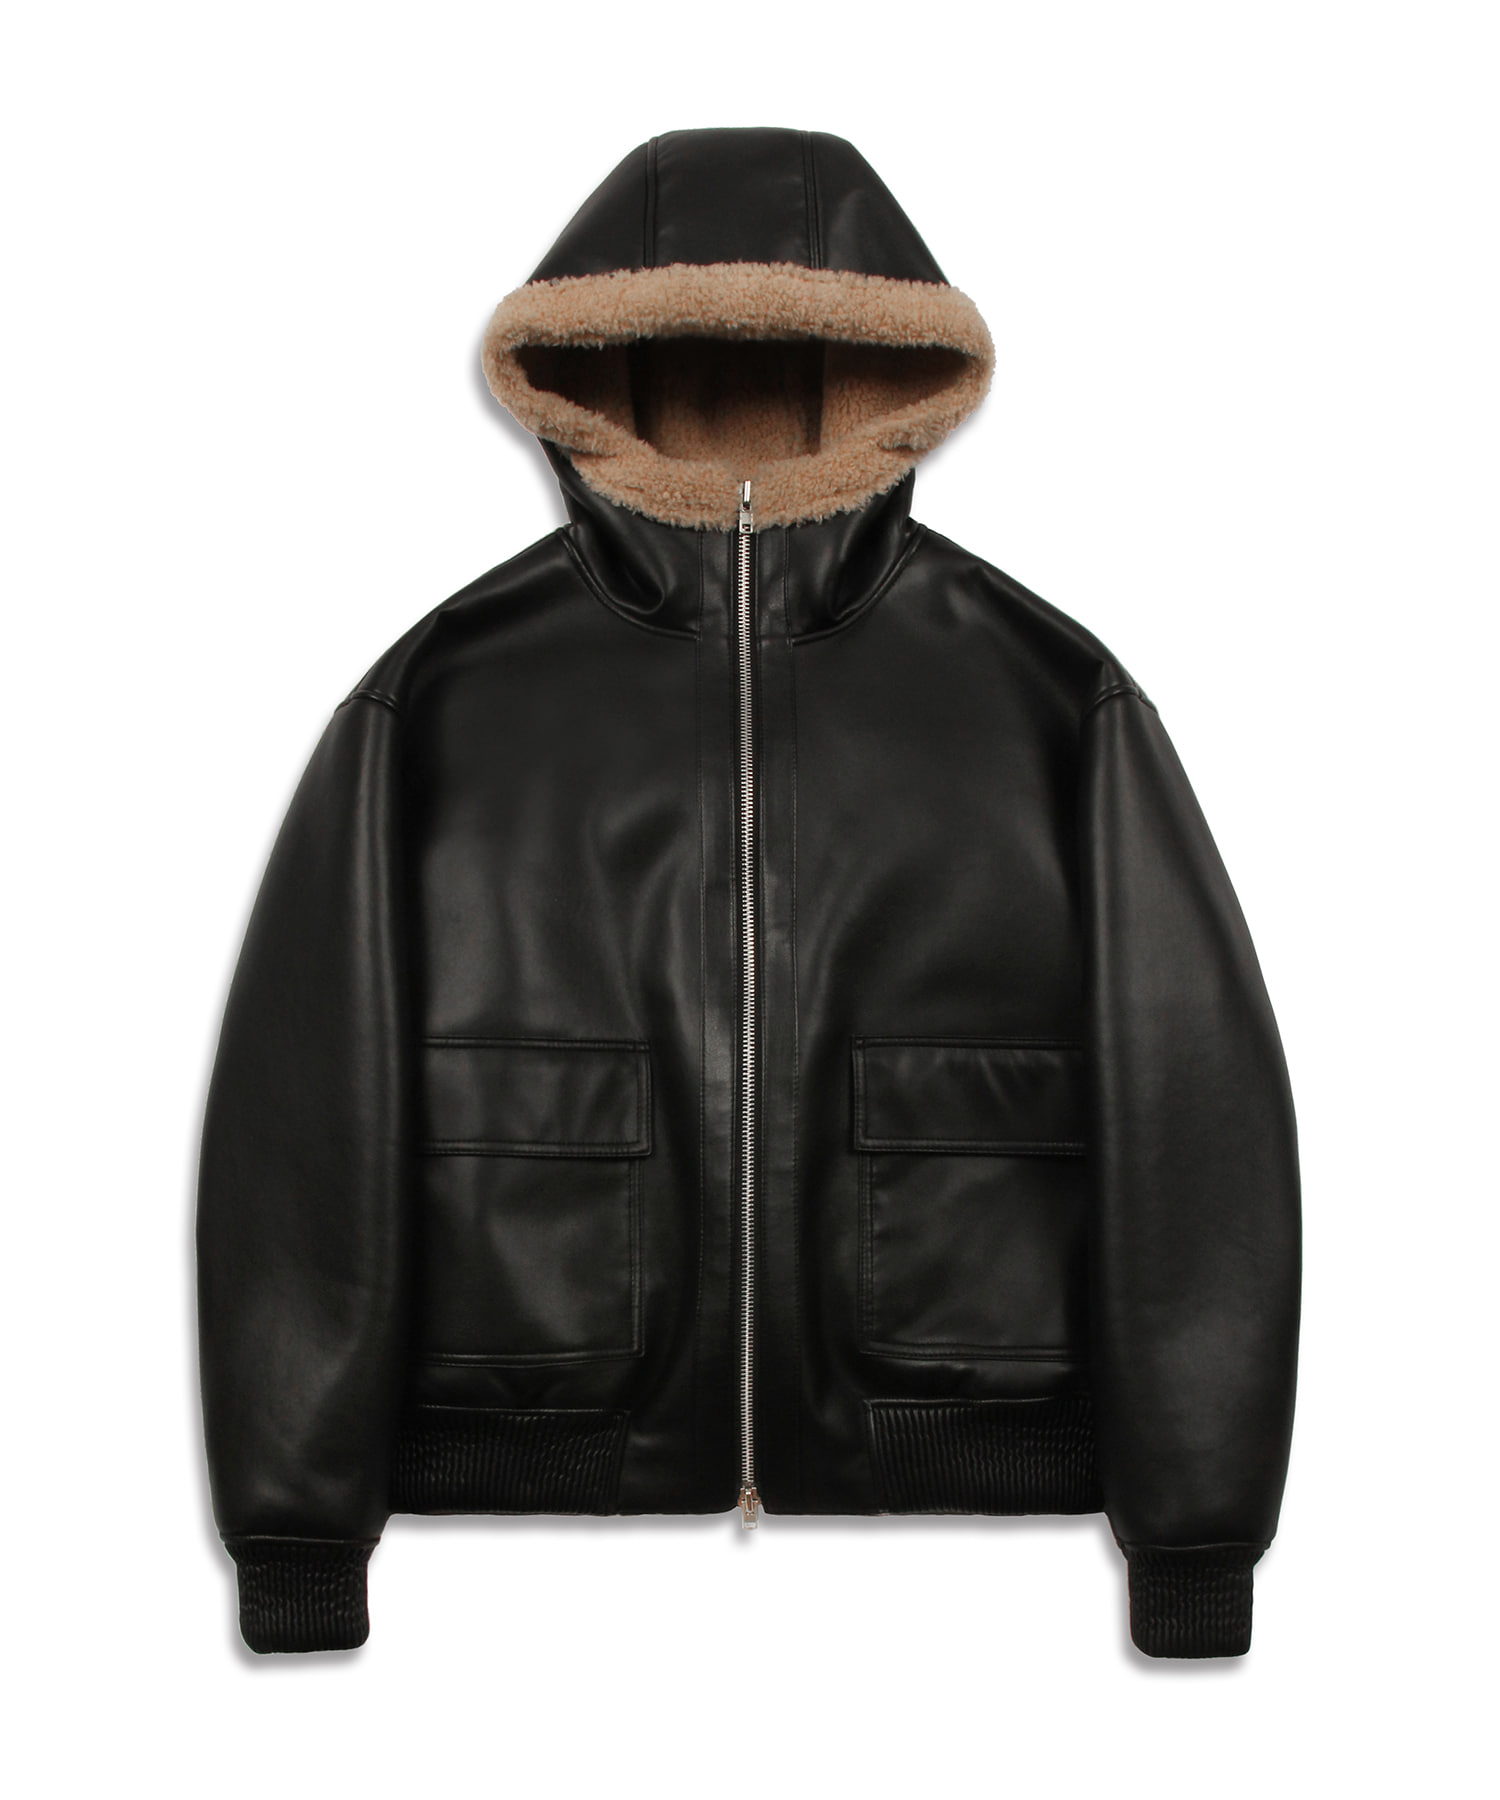 Solid hoodie mouton jacket